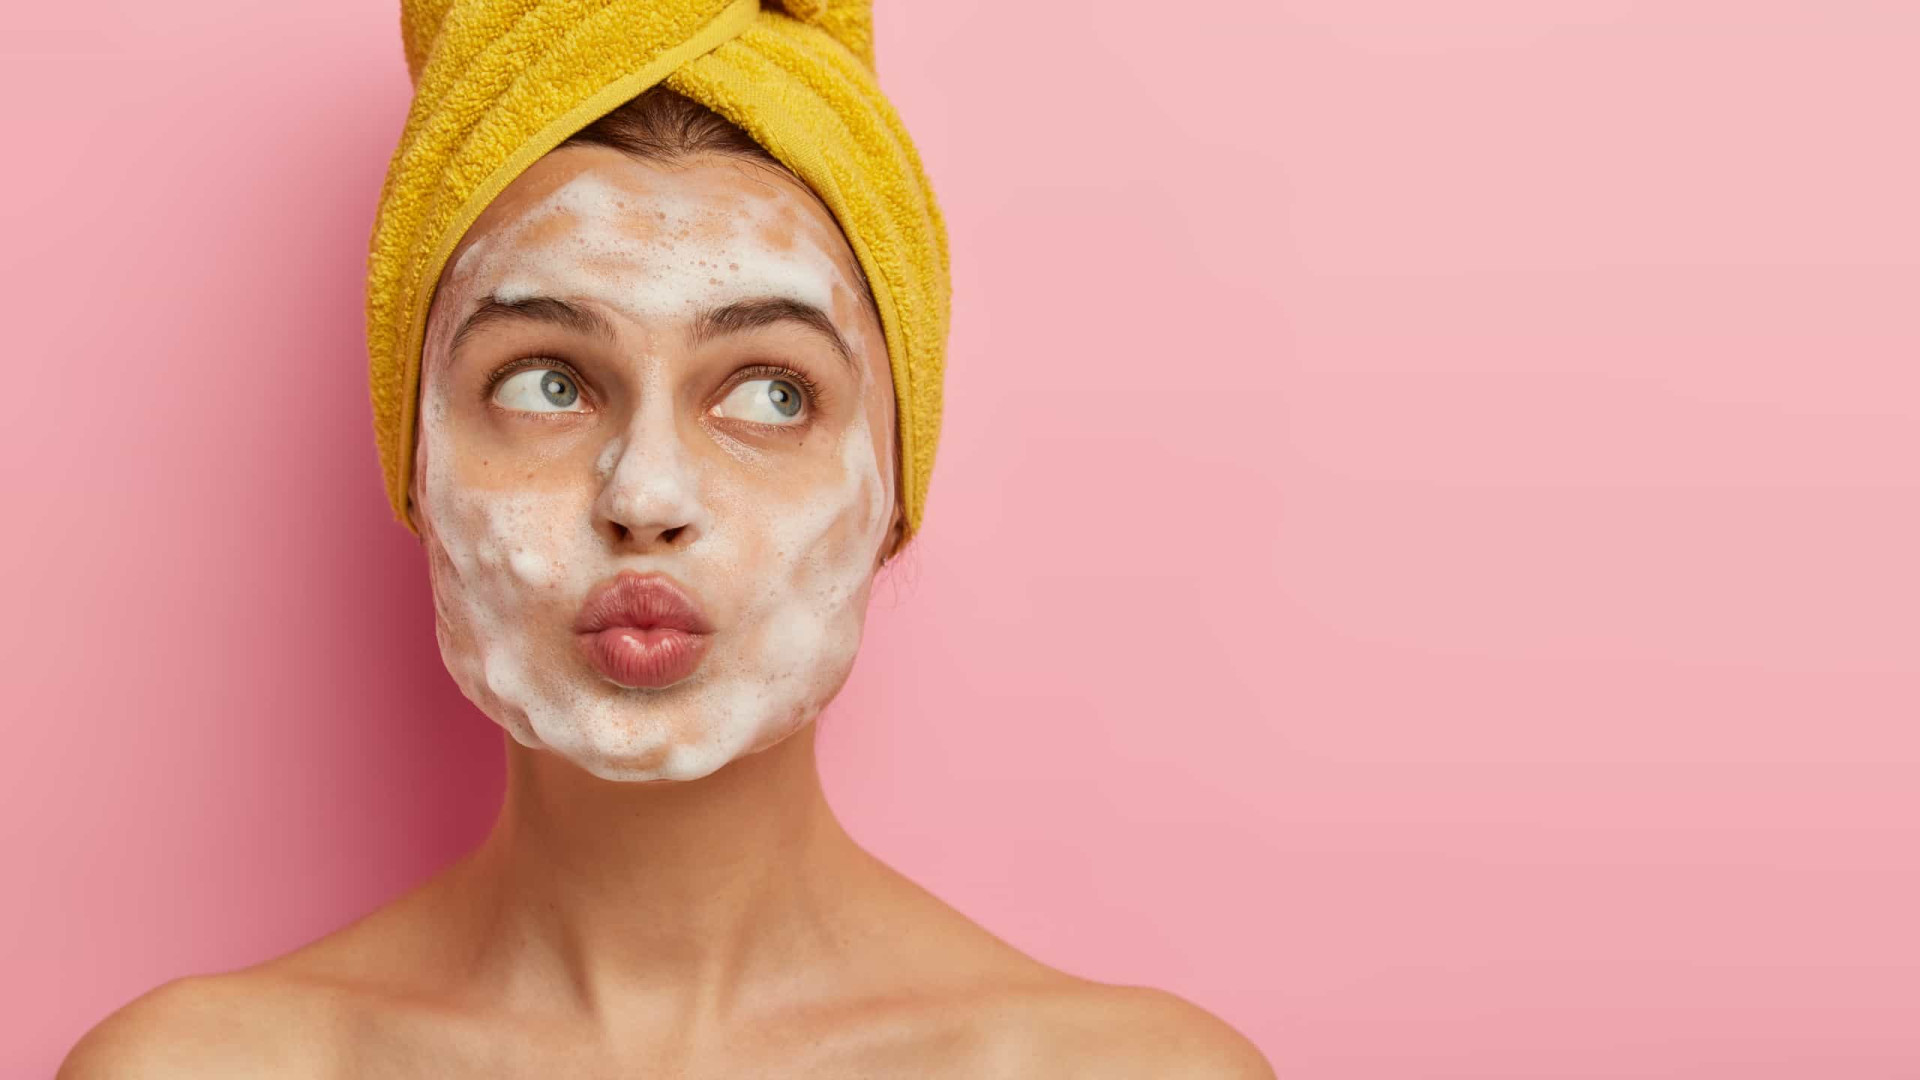 <p><span>With the bath stage over, it is time to move onto your facial. The first step is exfoliation, which you can do by wetting your face and using a cloth or brush to scrub away the dead skin. </span></p>